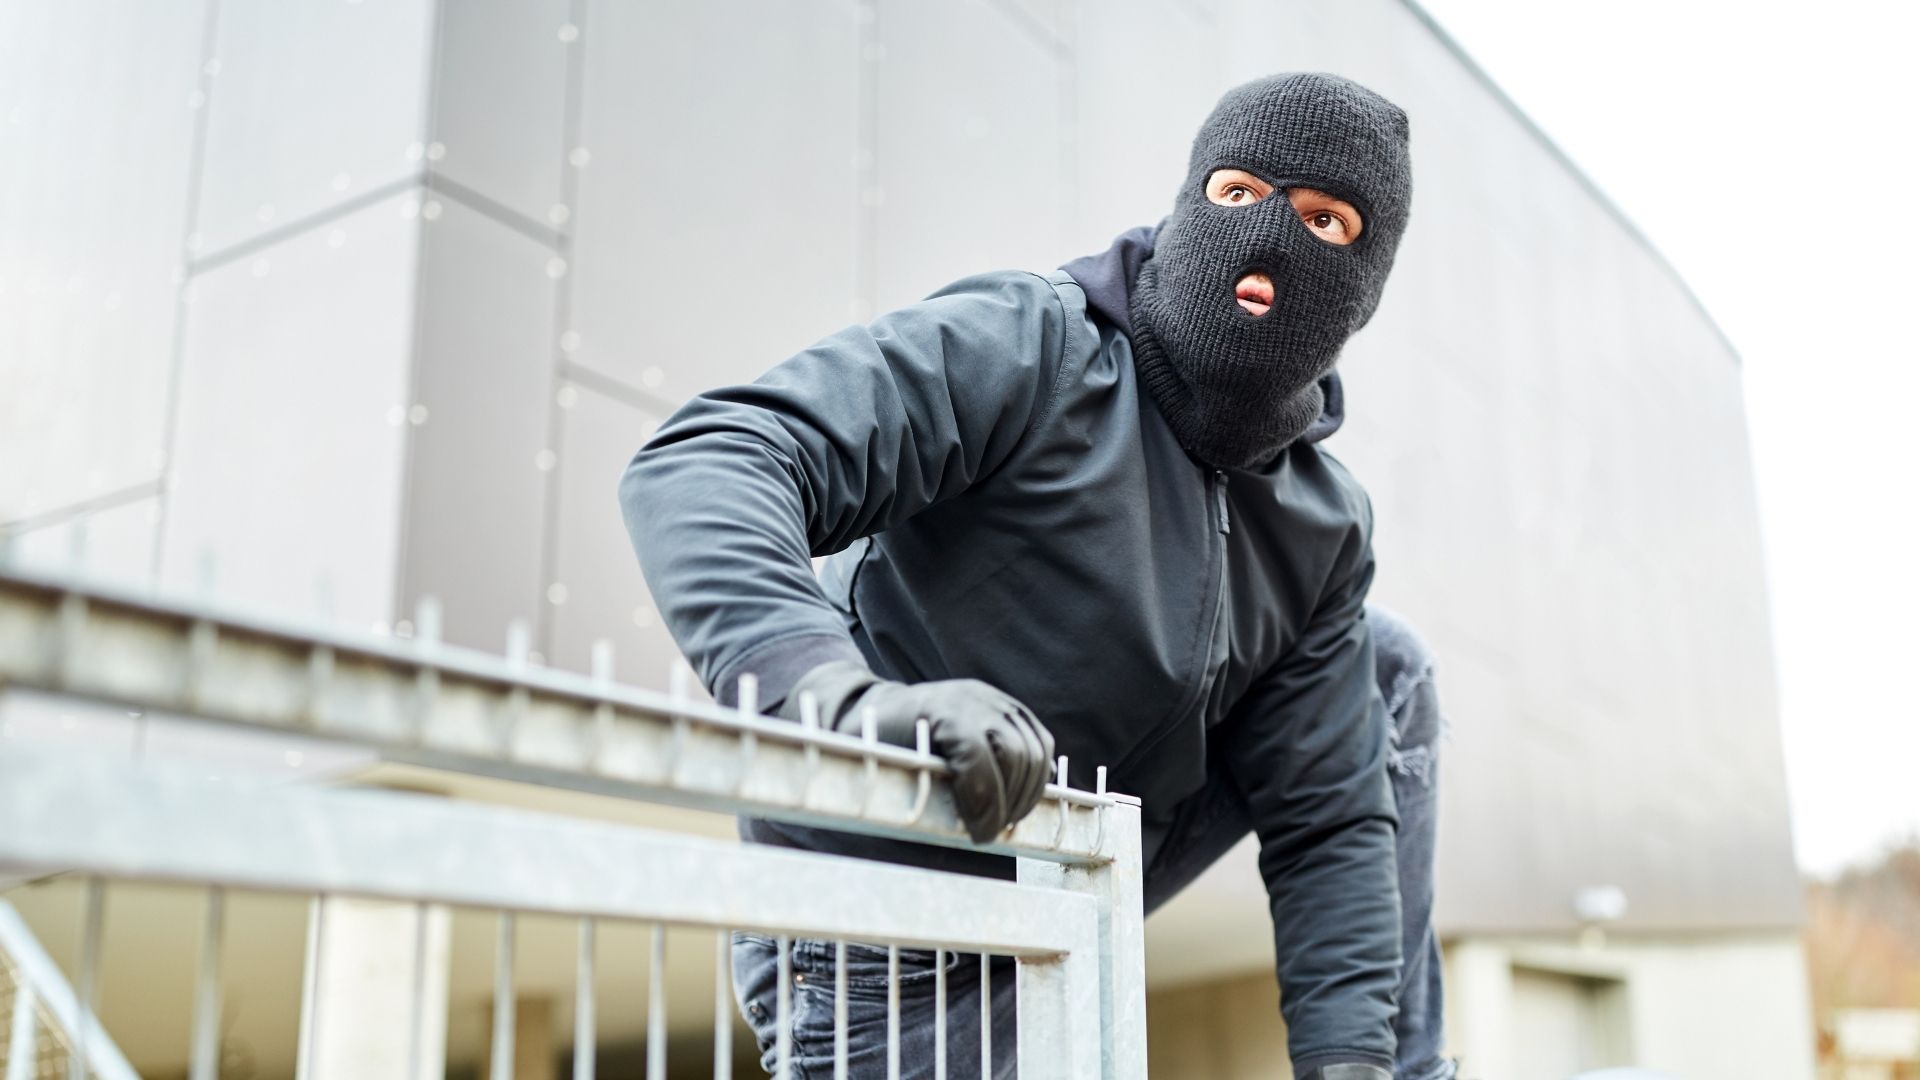 Person wearing black clothes and balaclava climbs fence